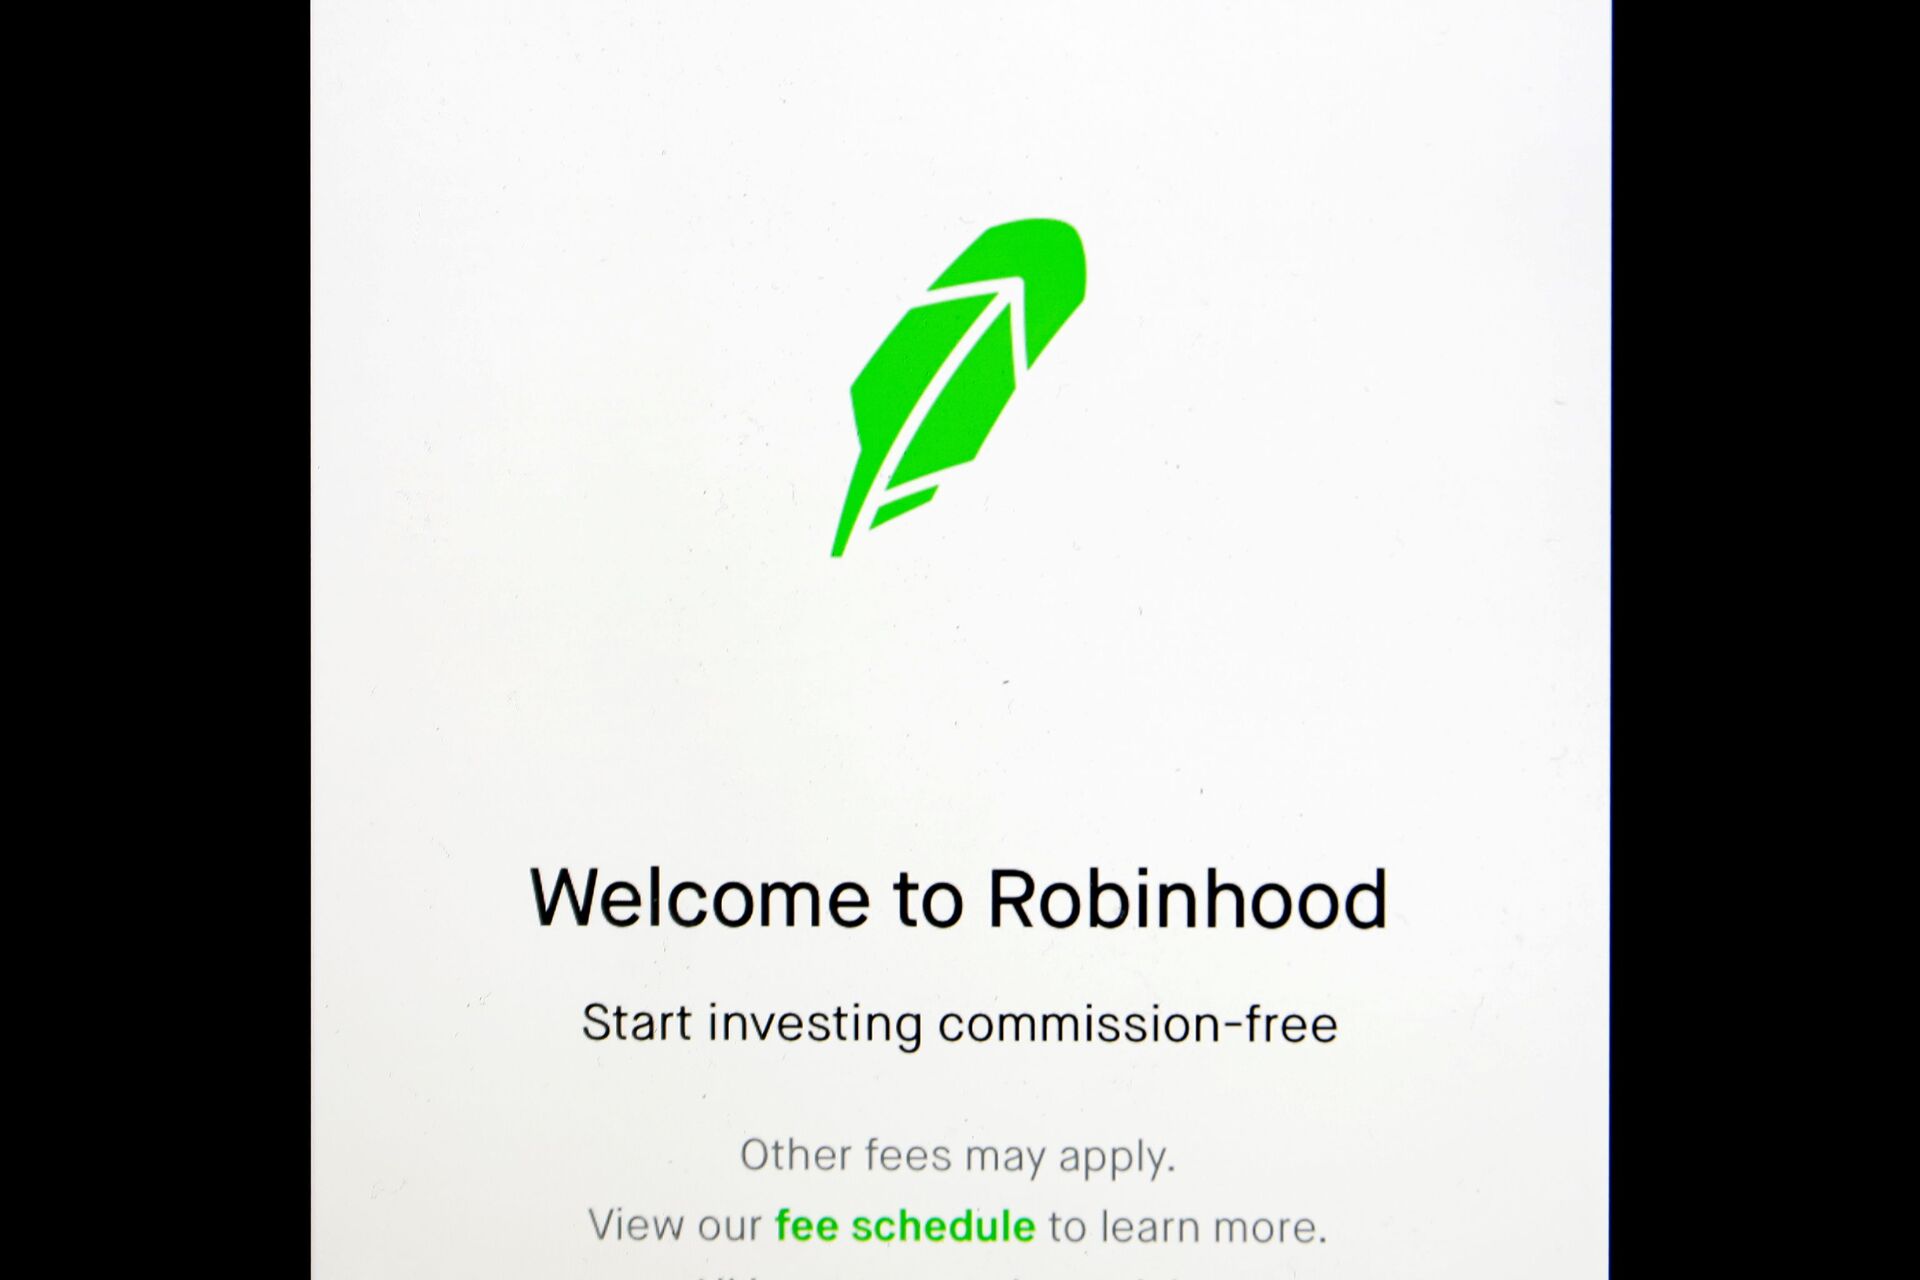 Parents Sue Robinhood After Their Son Suicide For Believing He Owed Hundreds of Thousands to Company - Sputnik International, 1920, 09.02.2021